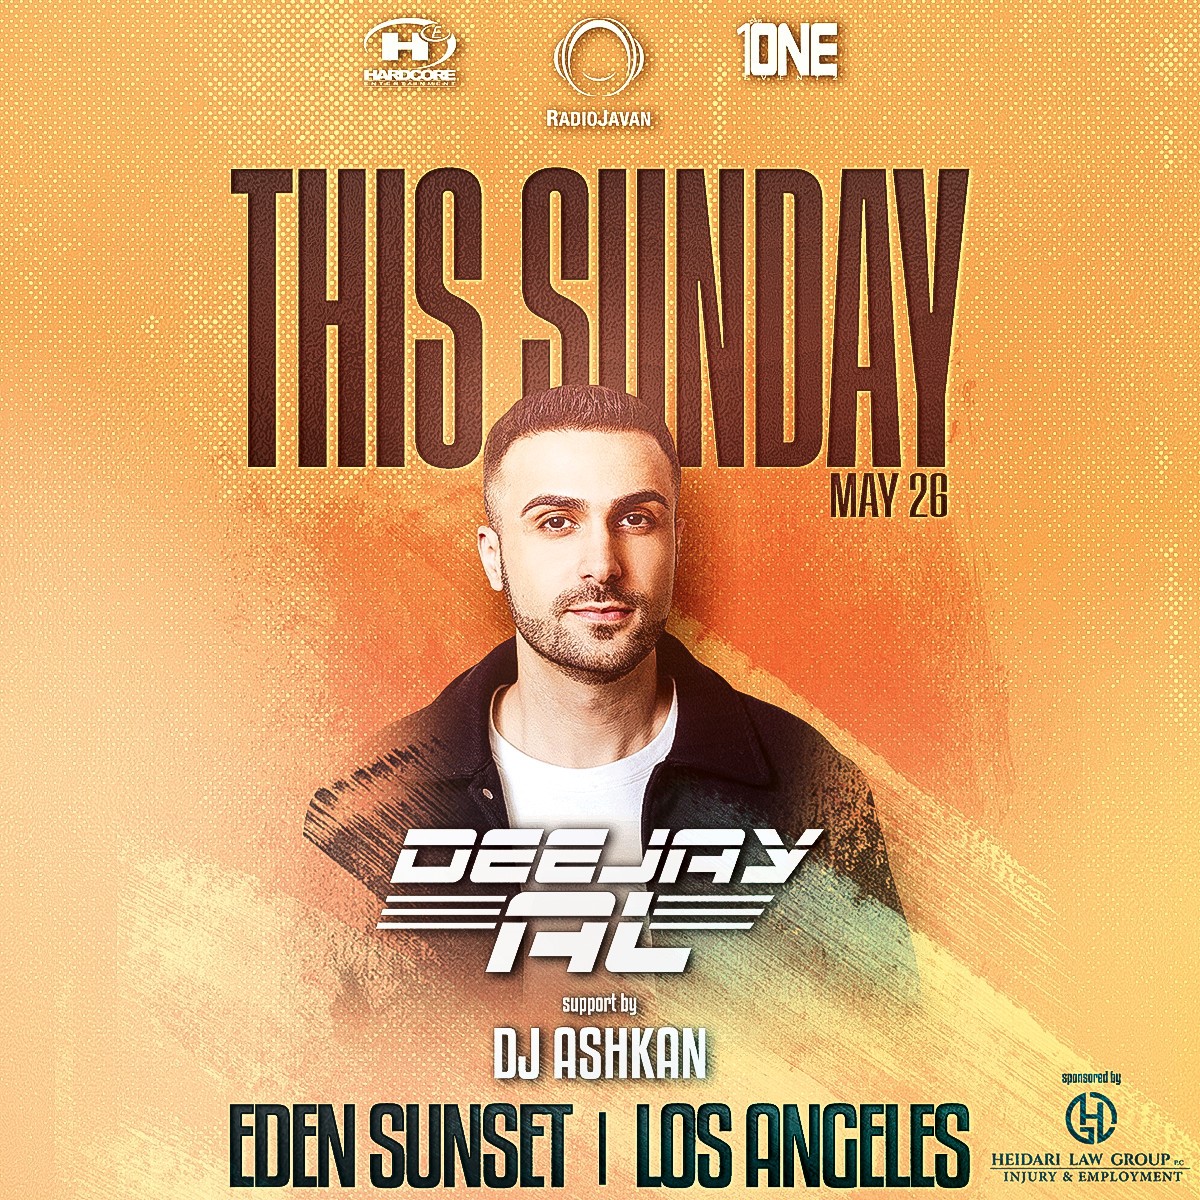 Memorial Day Wknd Party in Los Angeles feat DEEJAY AL Sunday, May 25 2024 @ Eden Sunset on May 26, 22:00@EDEN SUNSET - Buy tickets and Get information on HARDCORE & PLUS ONE tixhollywood.com